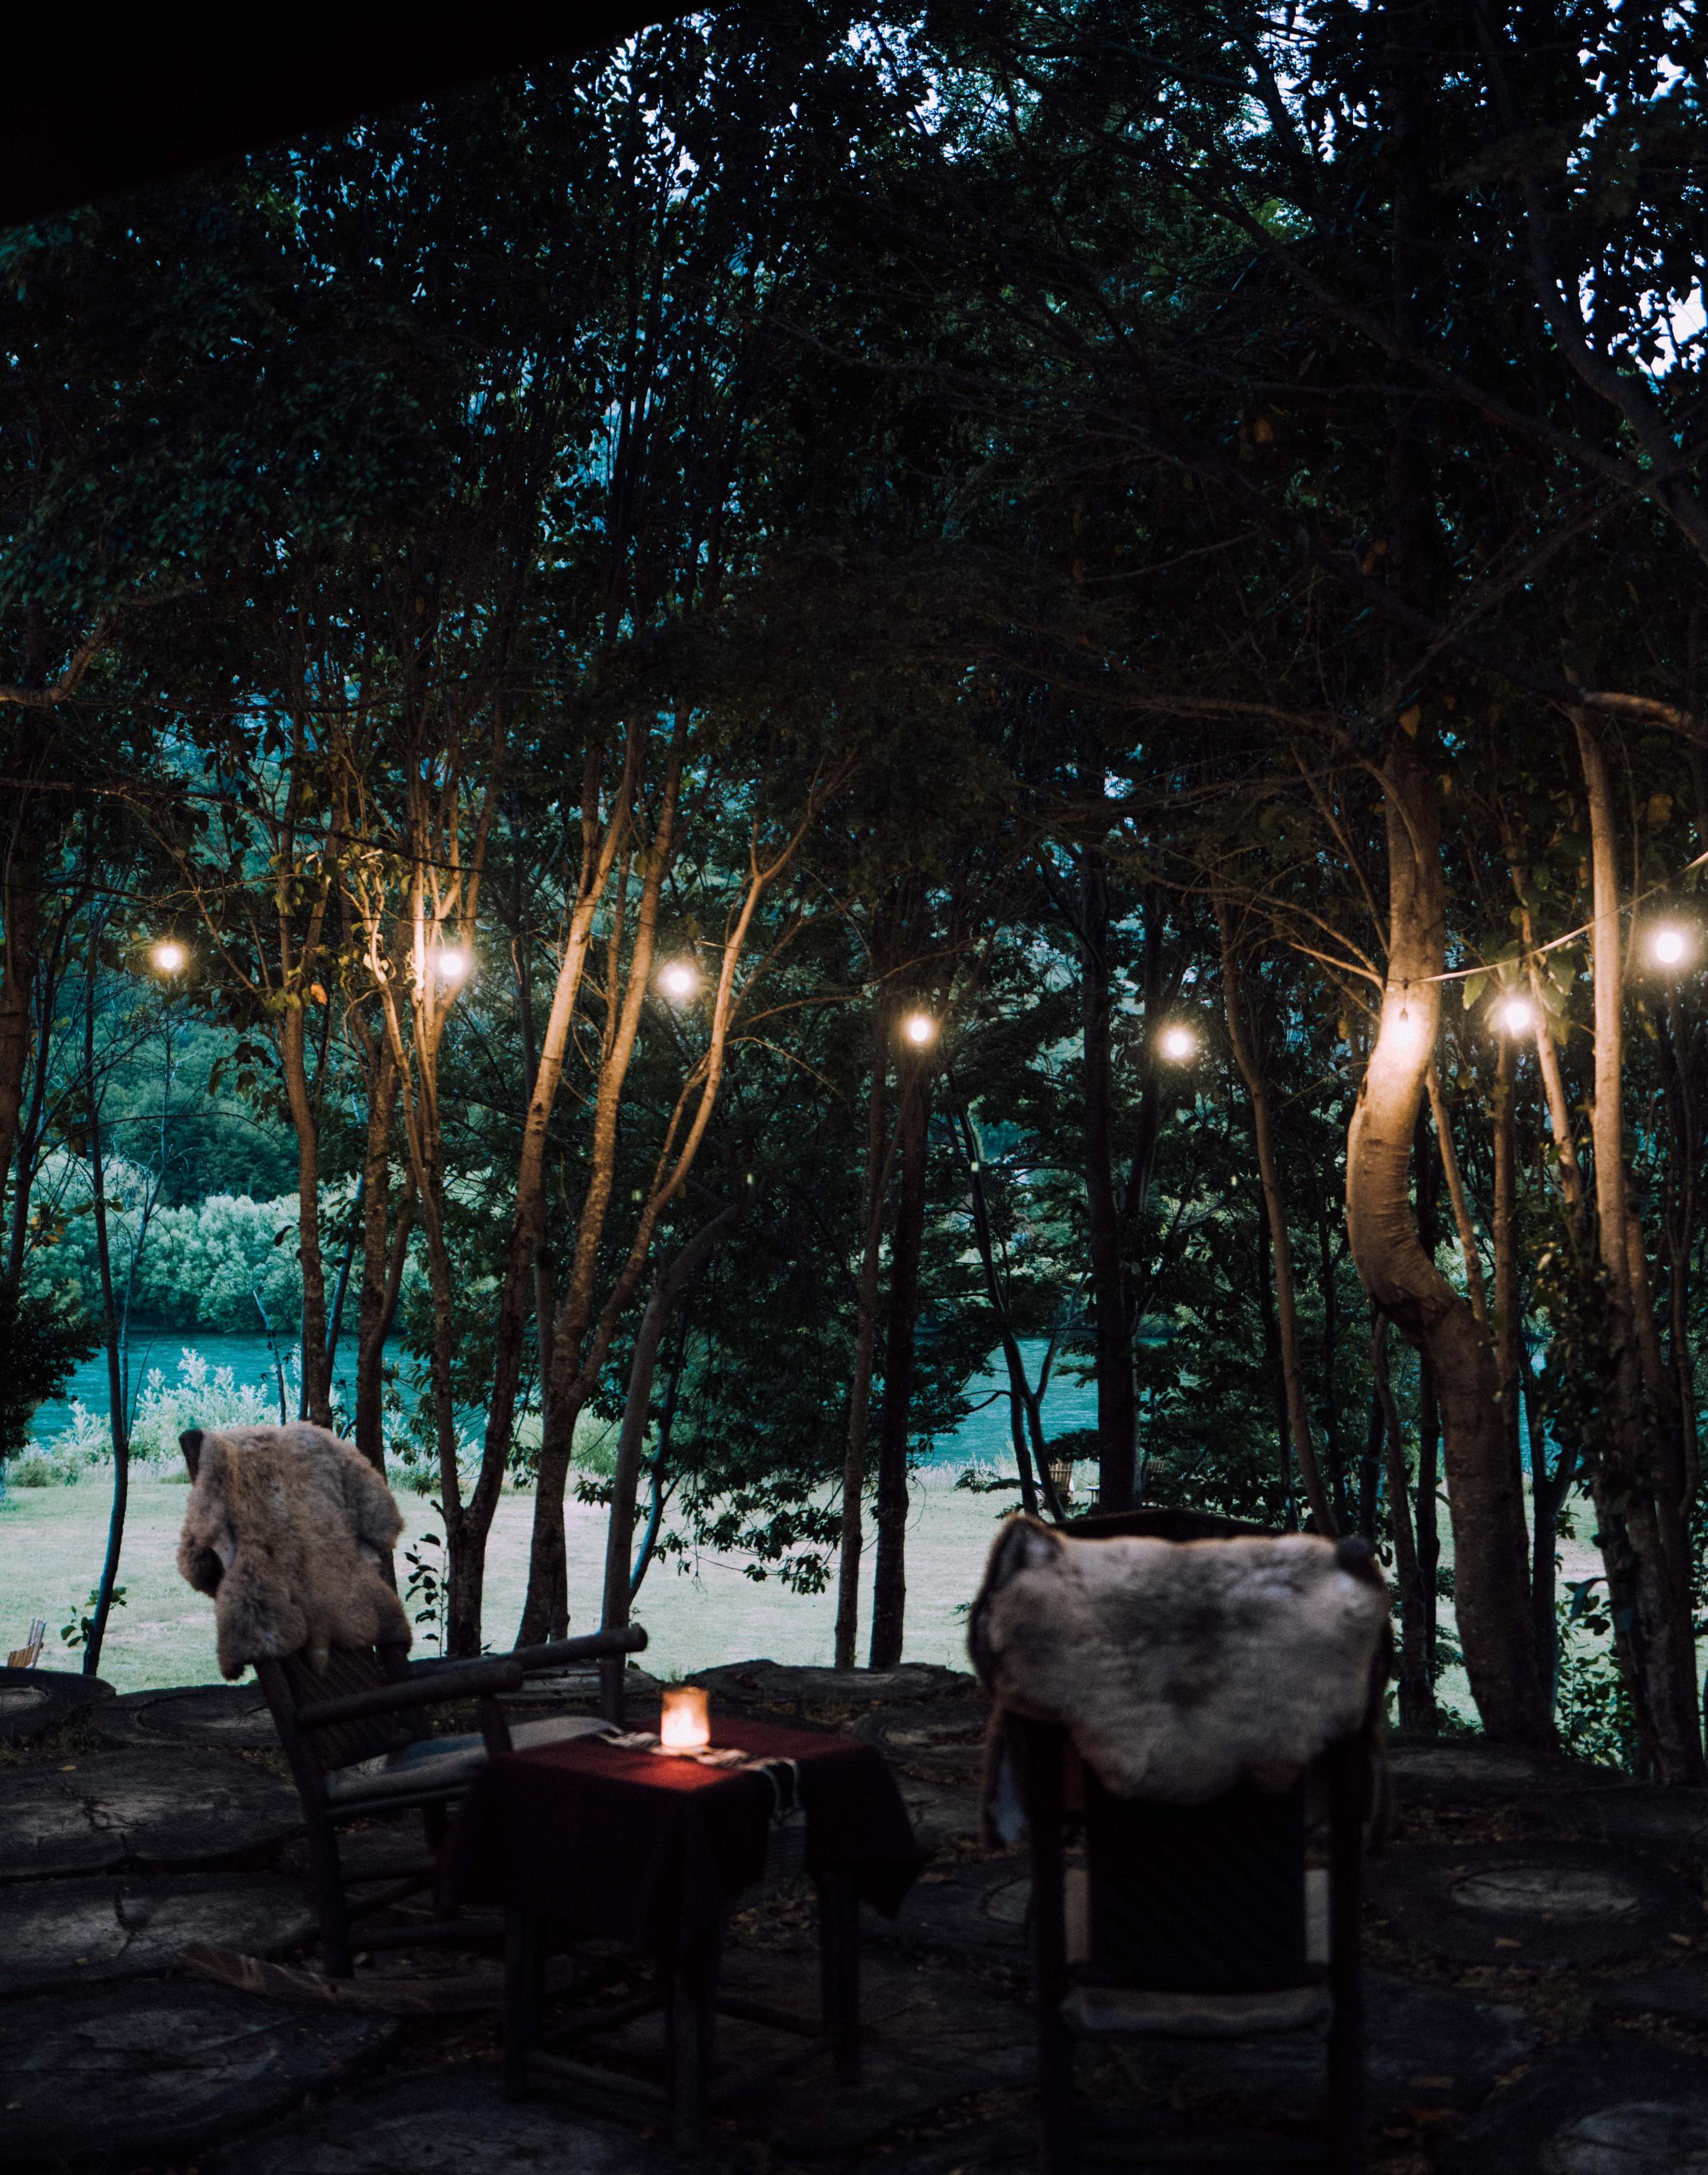 Empty chairs situated in private area with lights hanging from trees